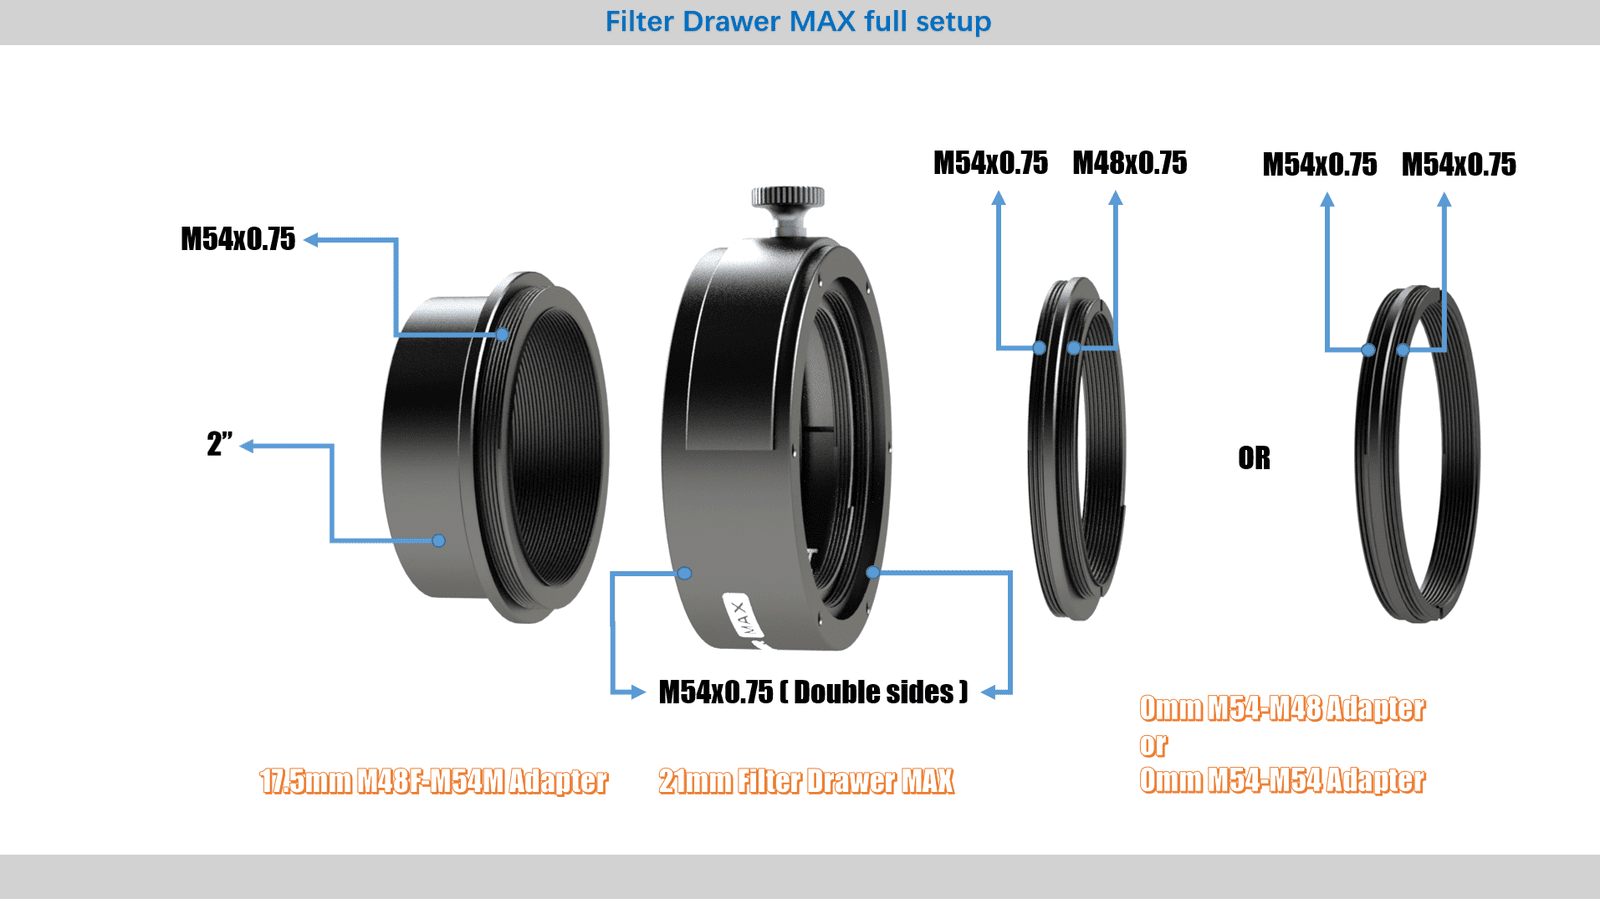 Filter Drawer MAX: Filter Holder for Astrophotography Dark Clear Skies